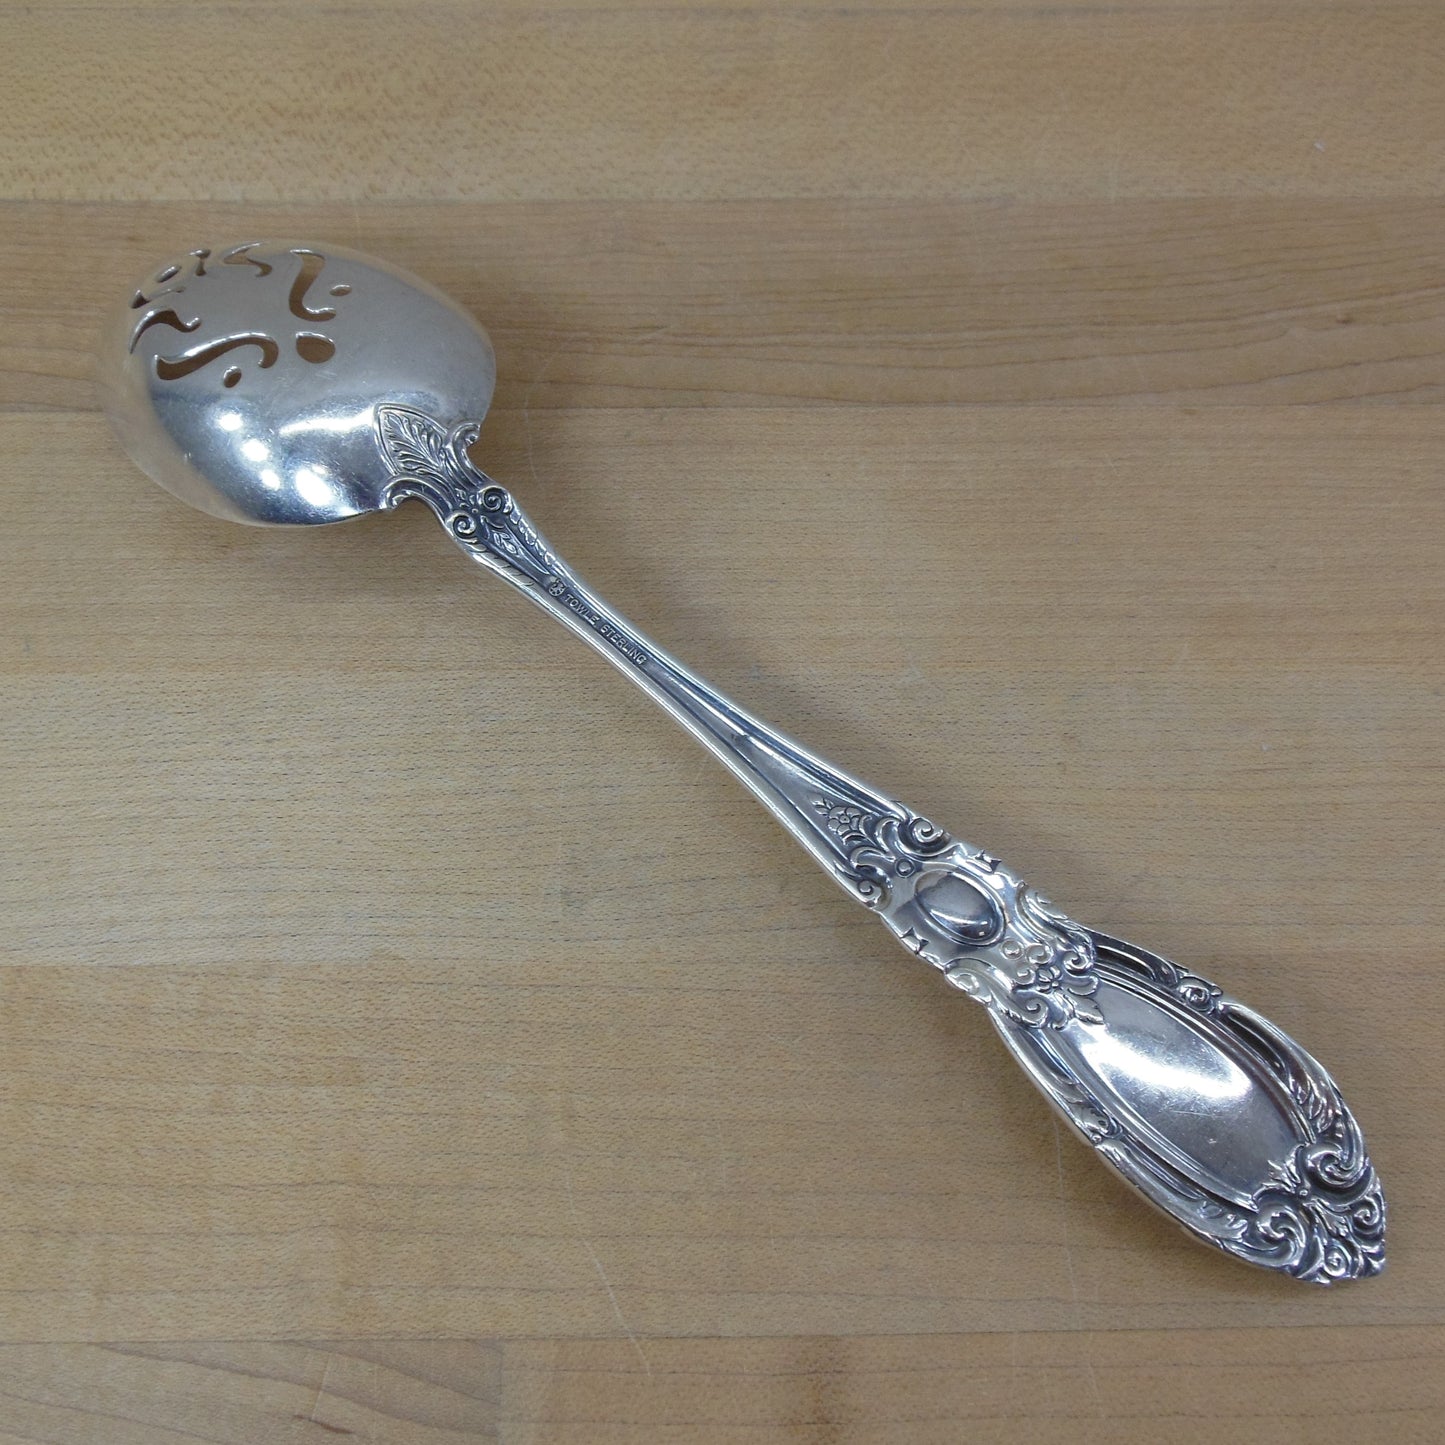 Towle King Richard Sterling Silver Flatware - Pierced Serving Spoon used